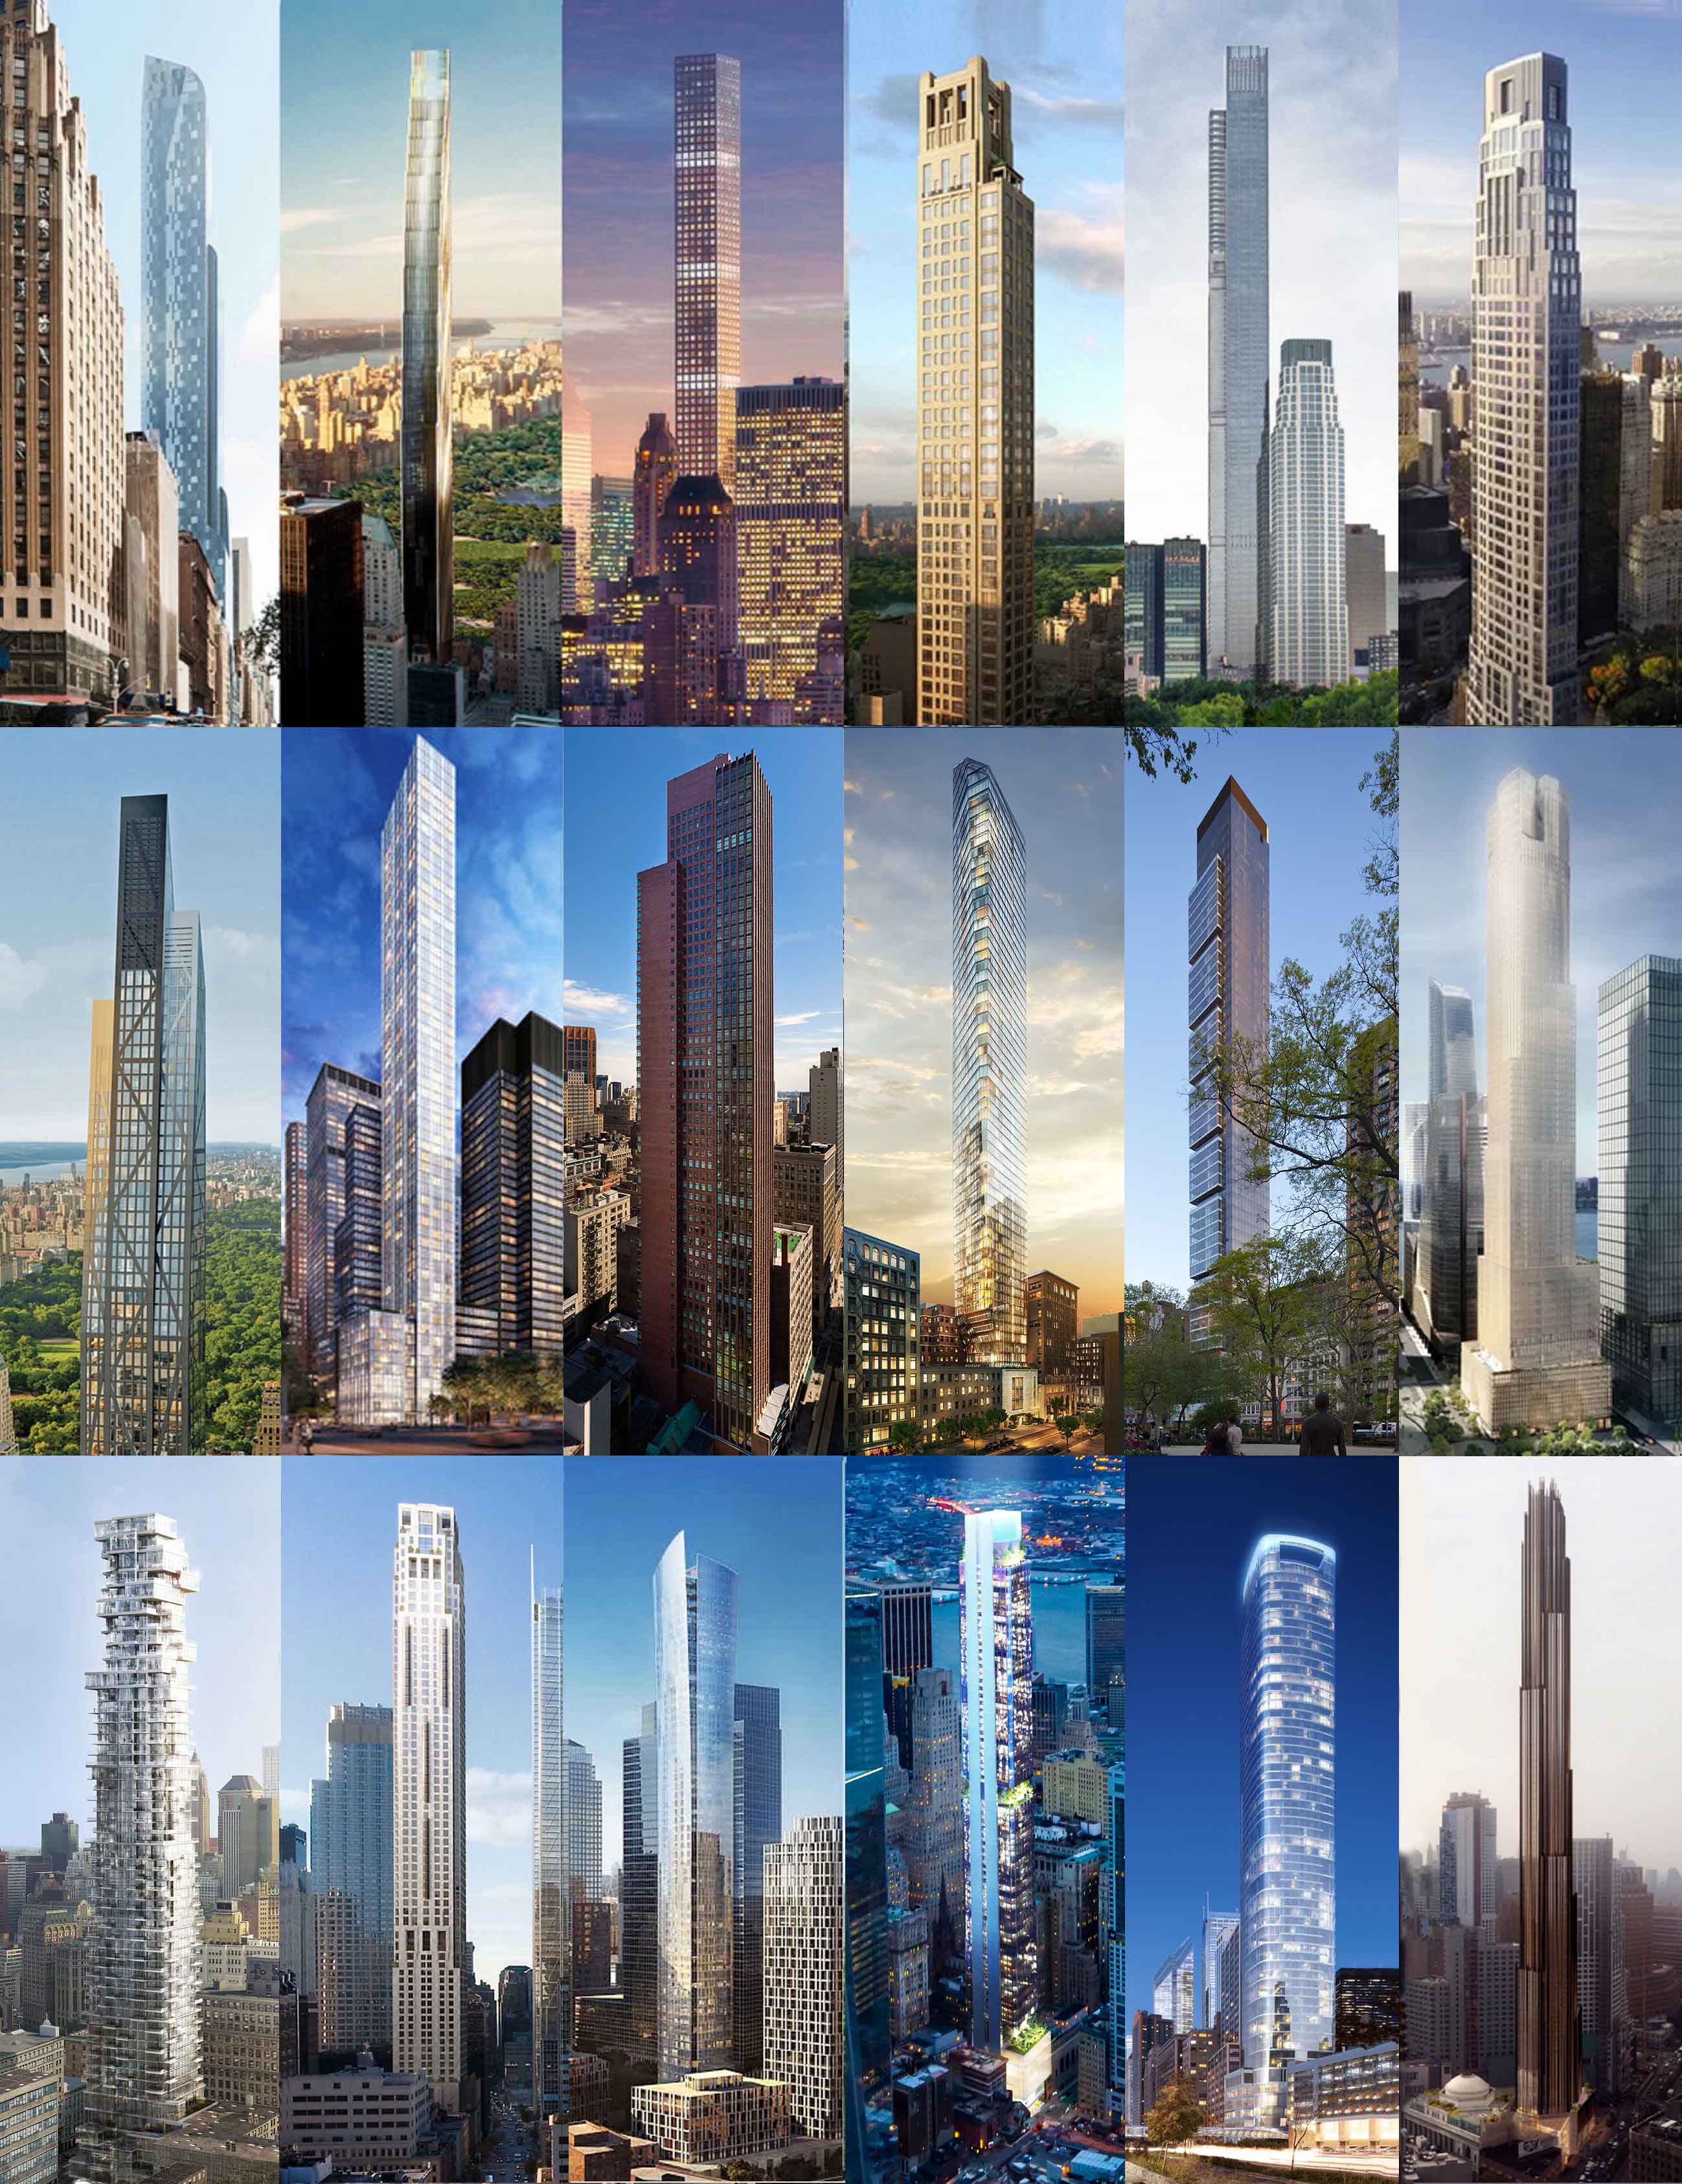 skyscrapers, One57, 111 West 57th Street, 432 Park Avenue, 520 Park Avenue, Central Park Tower, 220 Central Park South, 53W53rd, 100 E 53rd Street, Sky House, 45 E 22nd Street, One Madison, 35 Hudson Yards, 56 Leonard, 30 Park Place, 111 Murray Street, 125 Greenwich Street, 50 West Street, 9 DeKalb, new york architecture, nyc skyscrapers, luxury residential, residential skyscraper, new york's super-slenders, slender skyscrapers